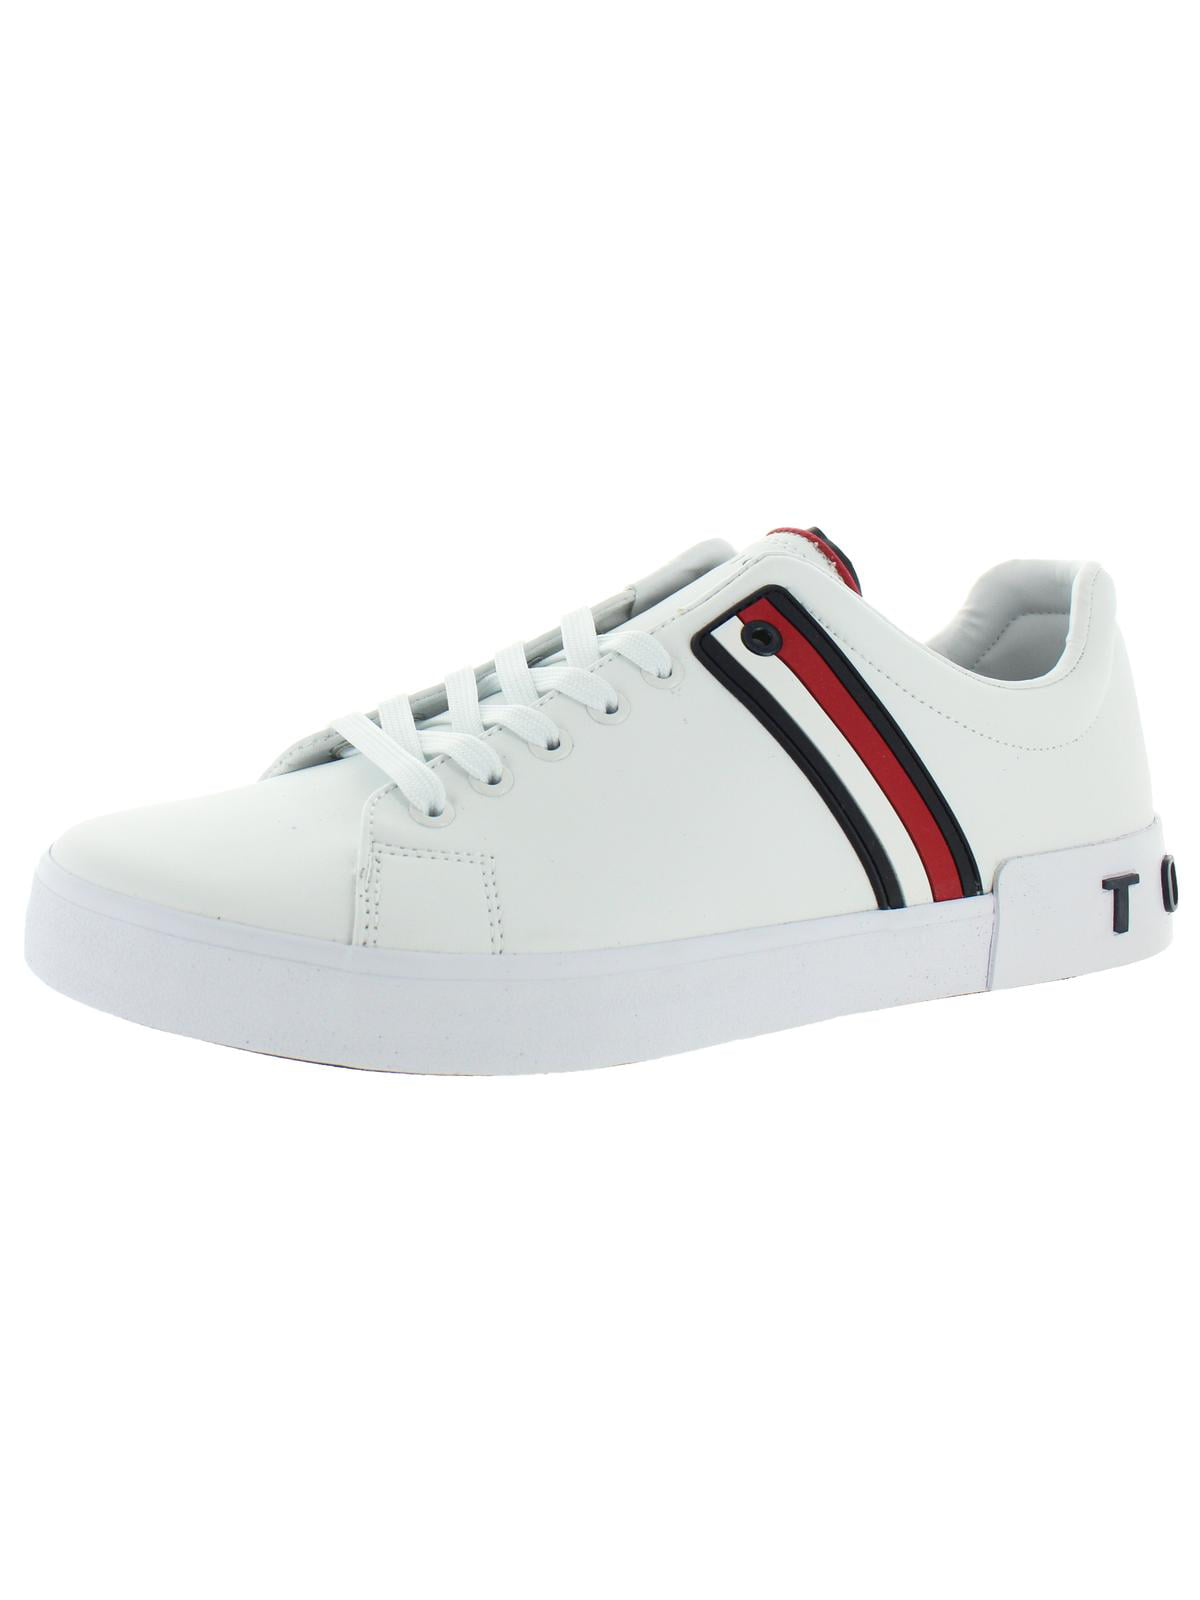 at se Industriel fordomme Tommy Hilfiger Mens Ramus Casual Athleisure Fashion Sneakers - Walmart.com